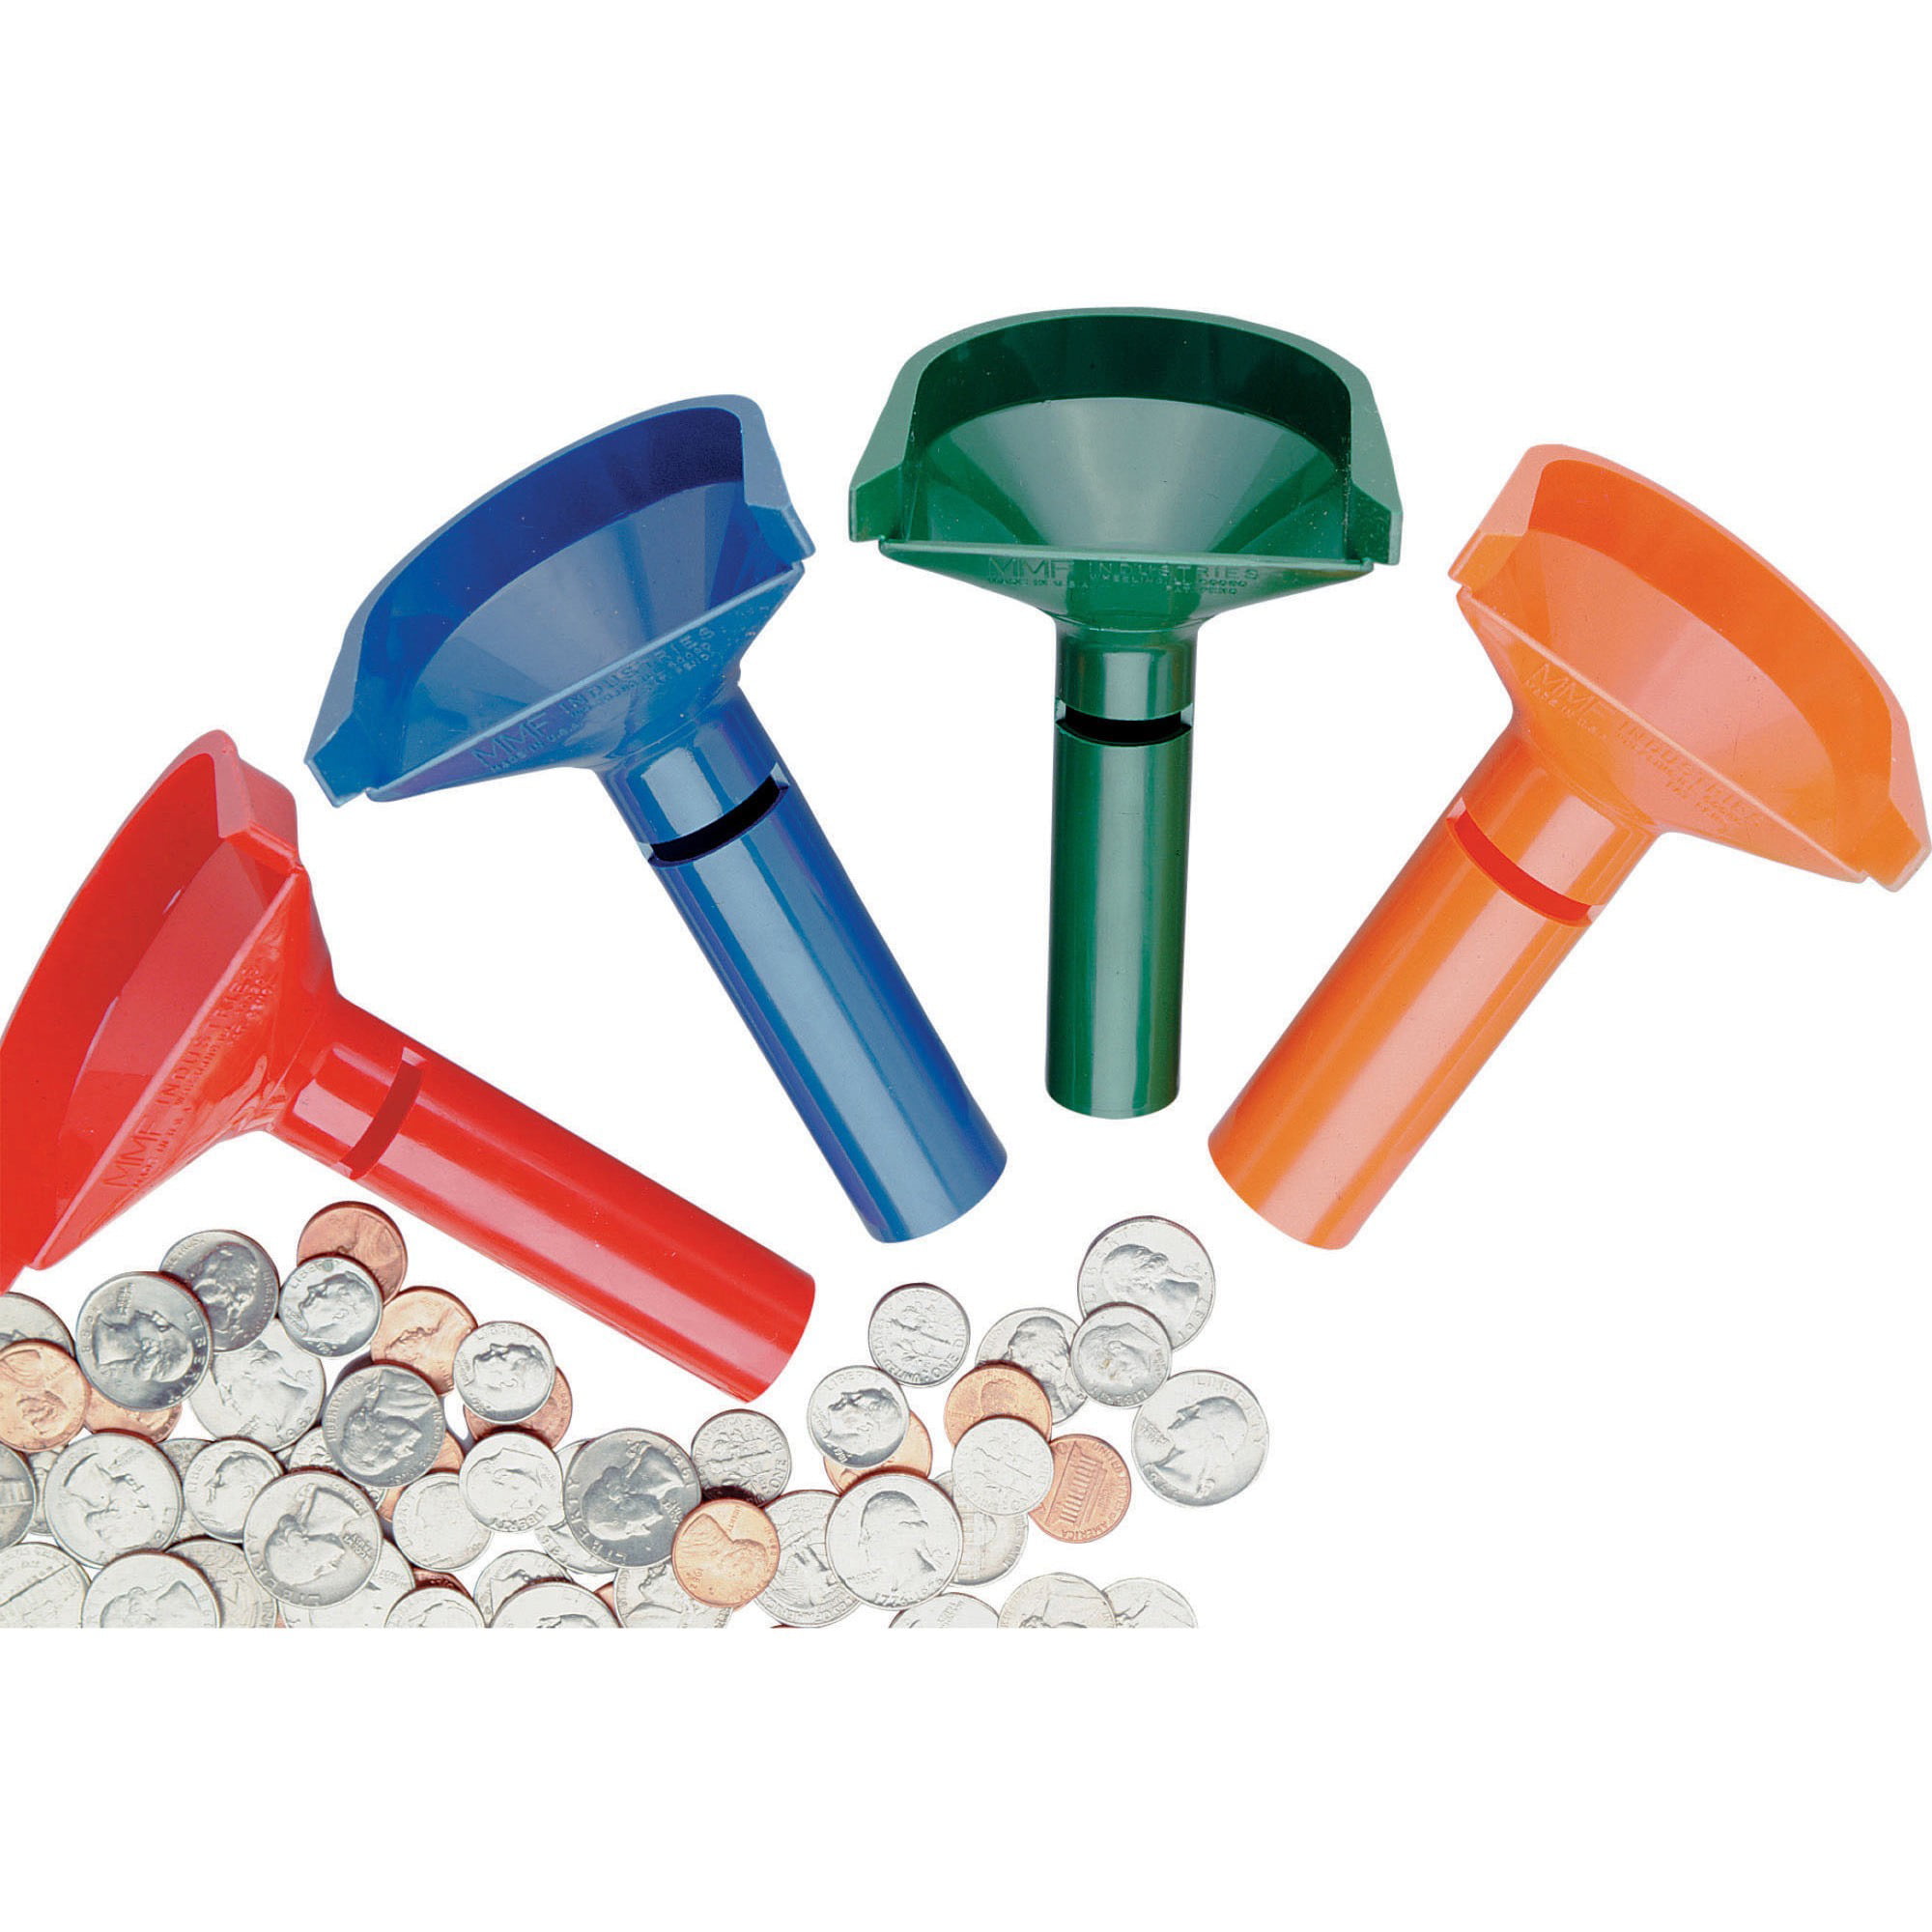 FAST WRAP Coin Counting Tubes Assorted Change Sorter Counter MMF Wrapper 1c-25c 